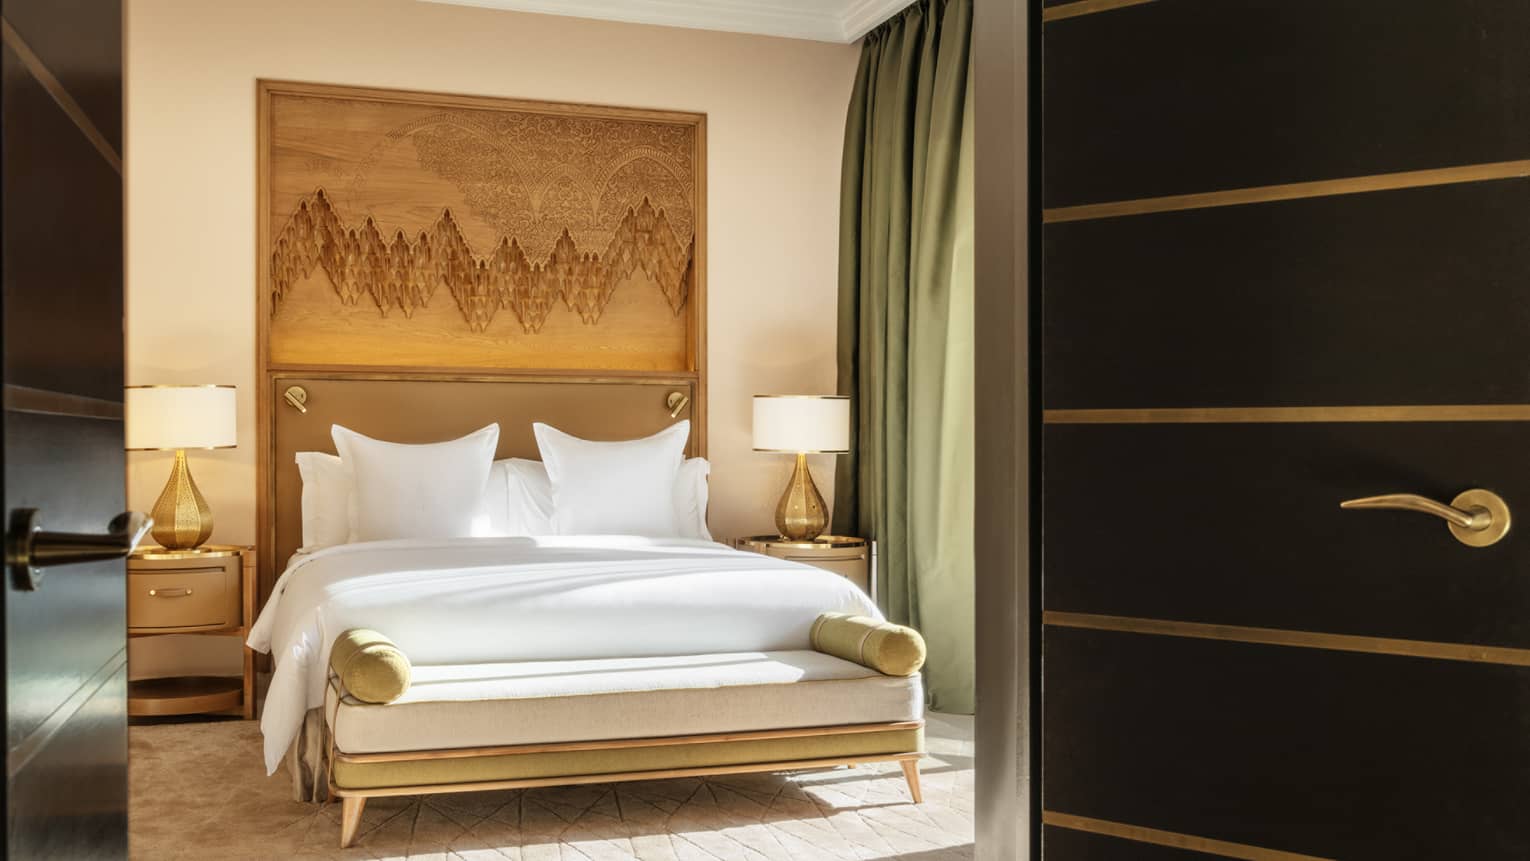 Entrance into a hotel room with king bed and wooden headboard